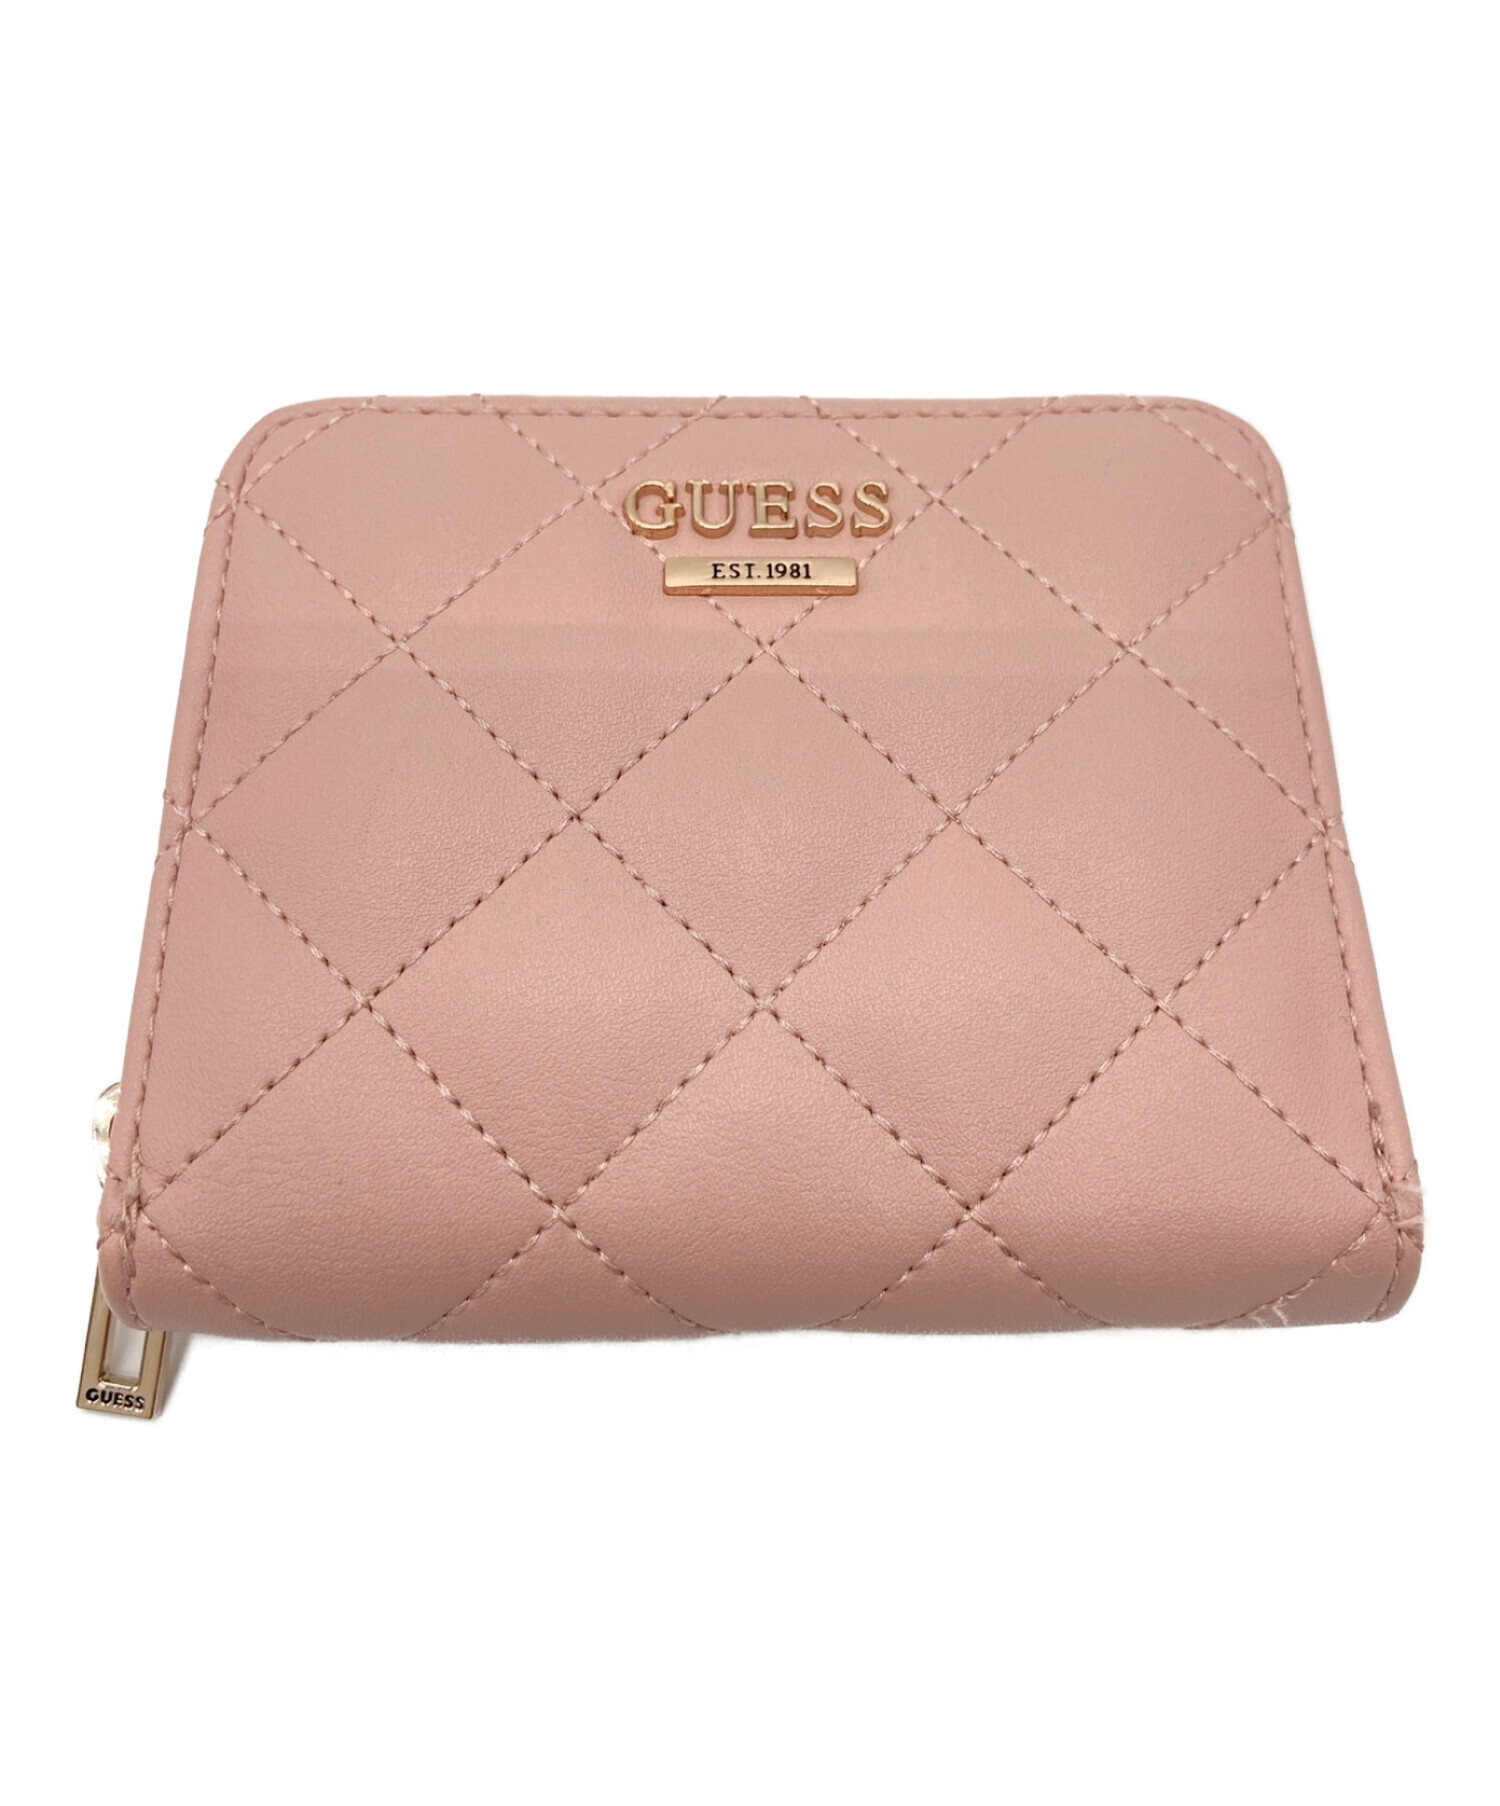 GUESS (ゲス) ラウンドファスナーコンパクト財布 ピンク